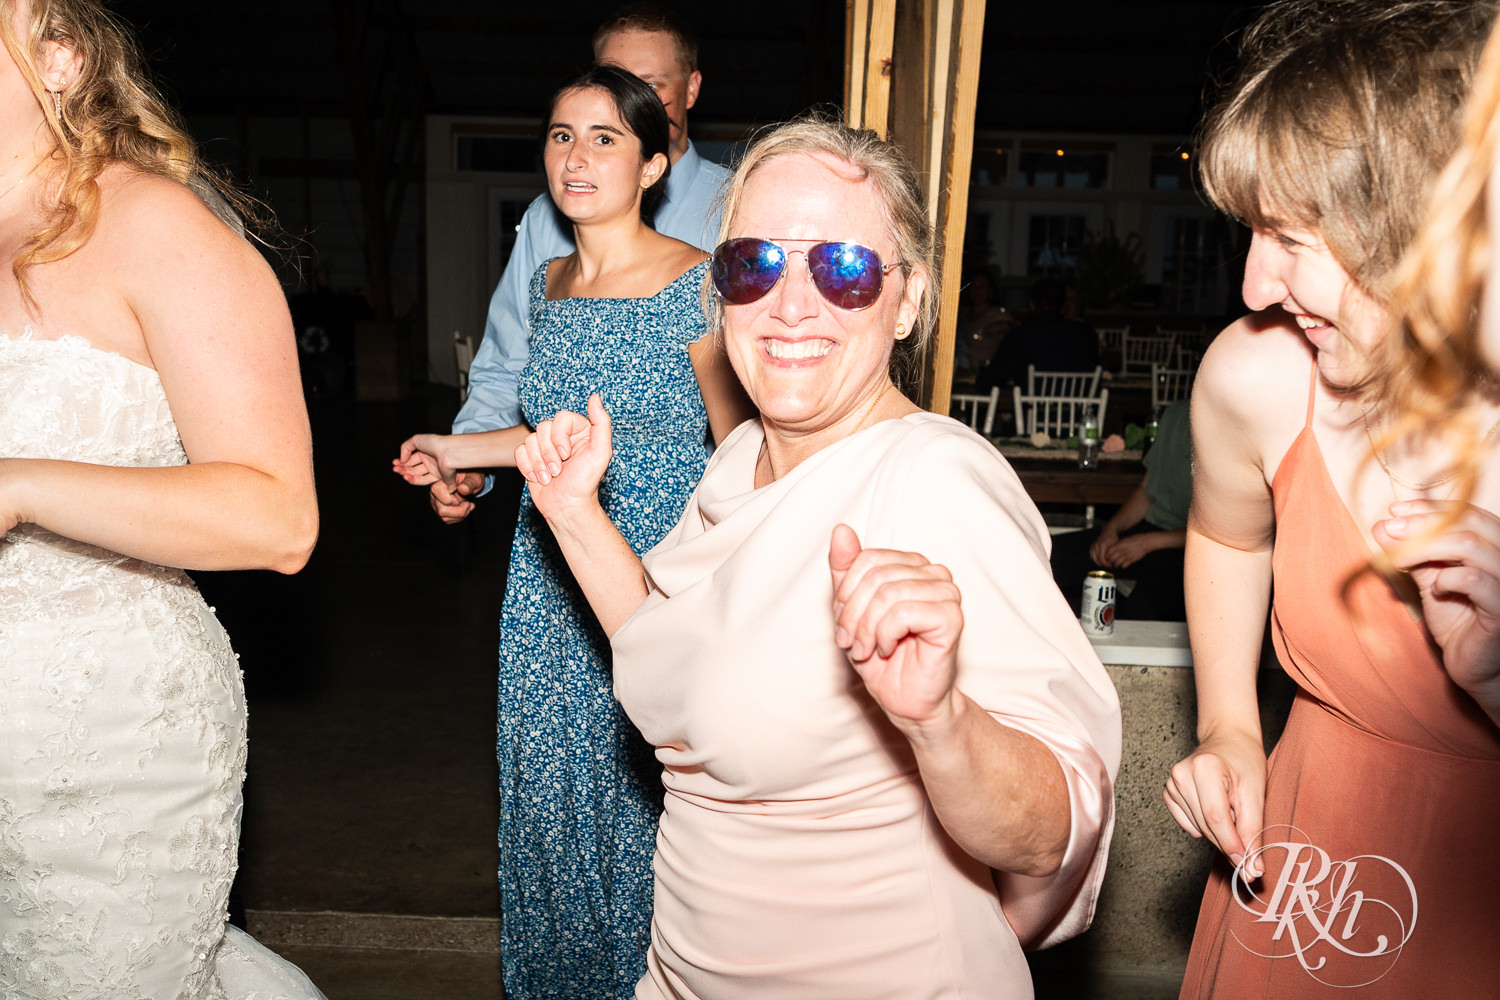 Guests dance during wedding reception at Cottage Farmhouse in Glencoe, Minnesota.